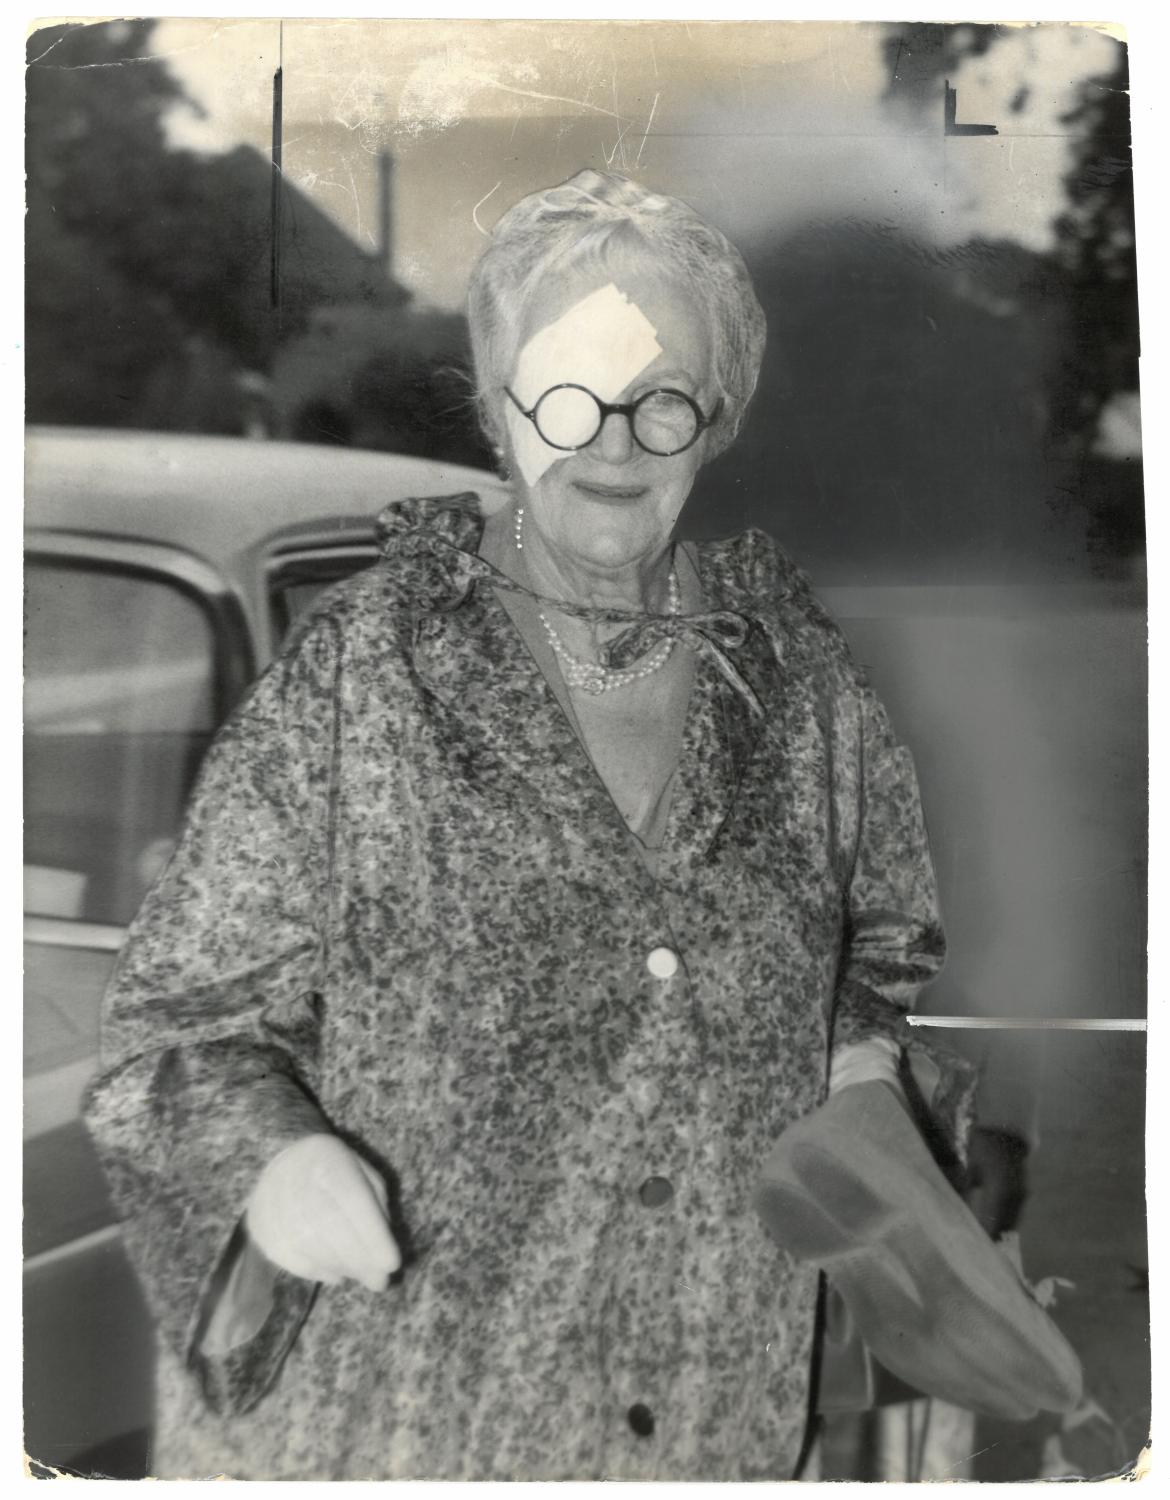 An Original Press Photo Of Lady Clementine Churchill Wearing An Eyepatch Published On 1 September 1959 Photograph 1959 Churchill Book Collector Abaa Ilab Ioba